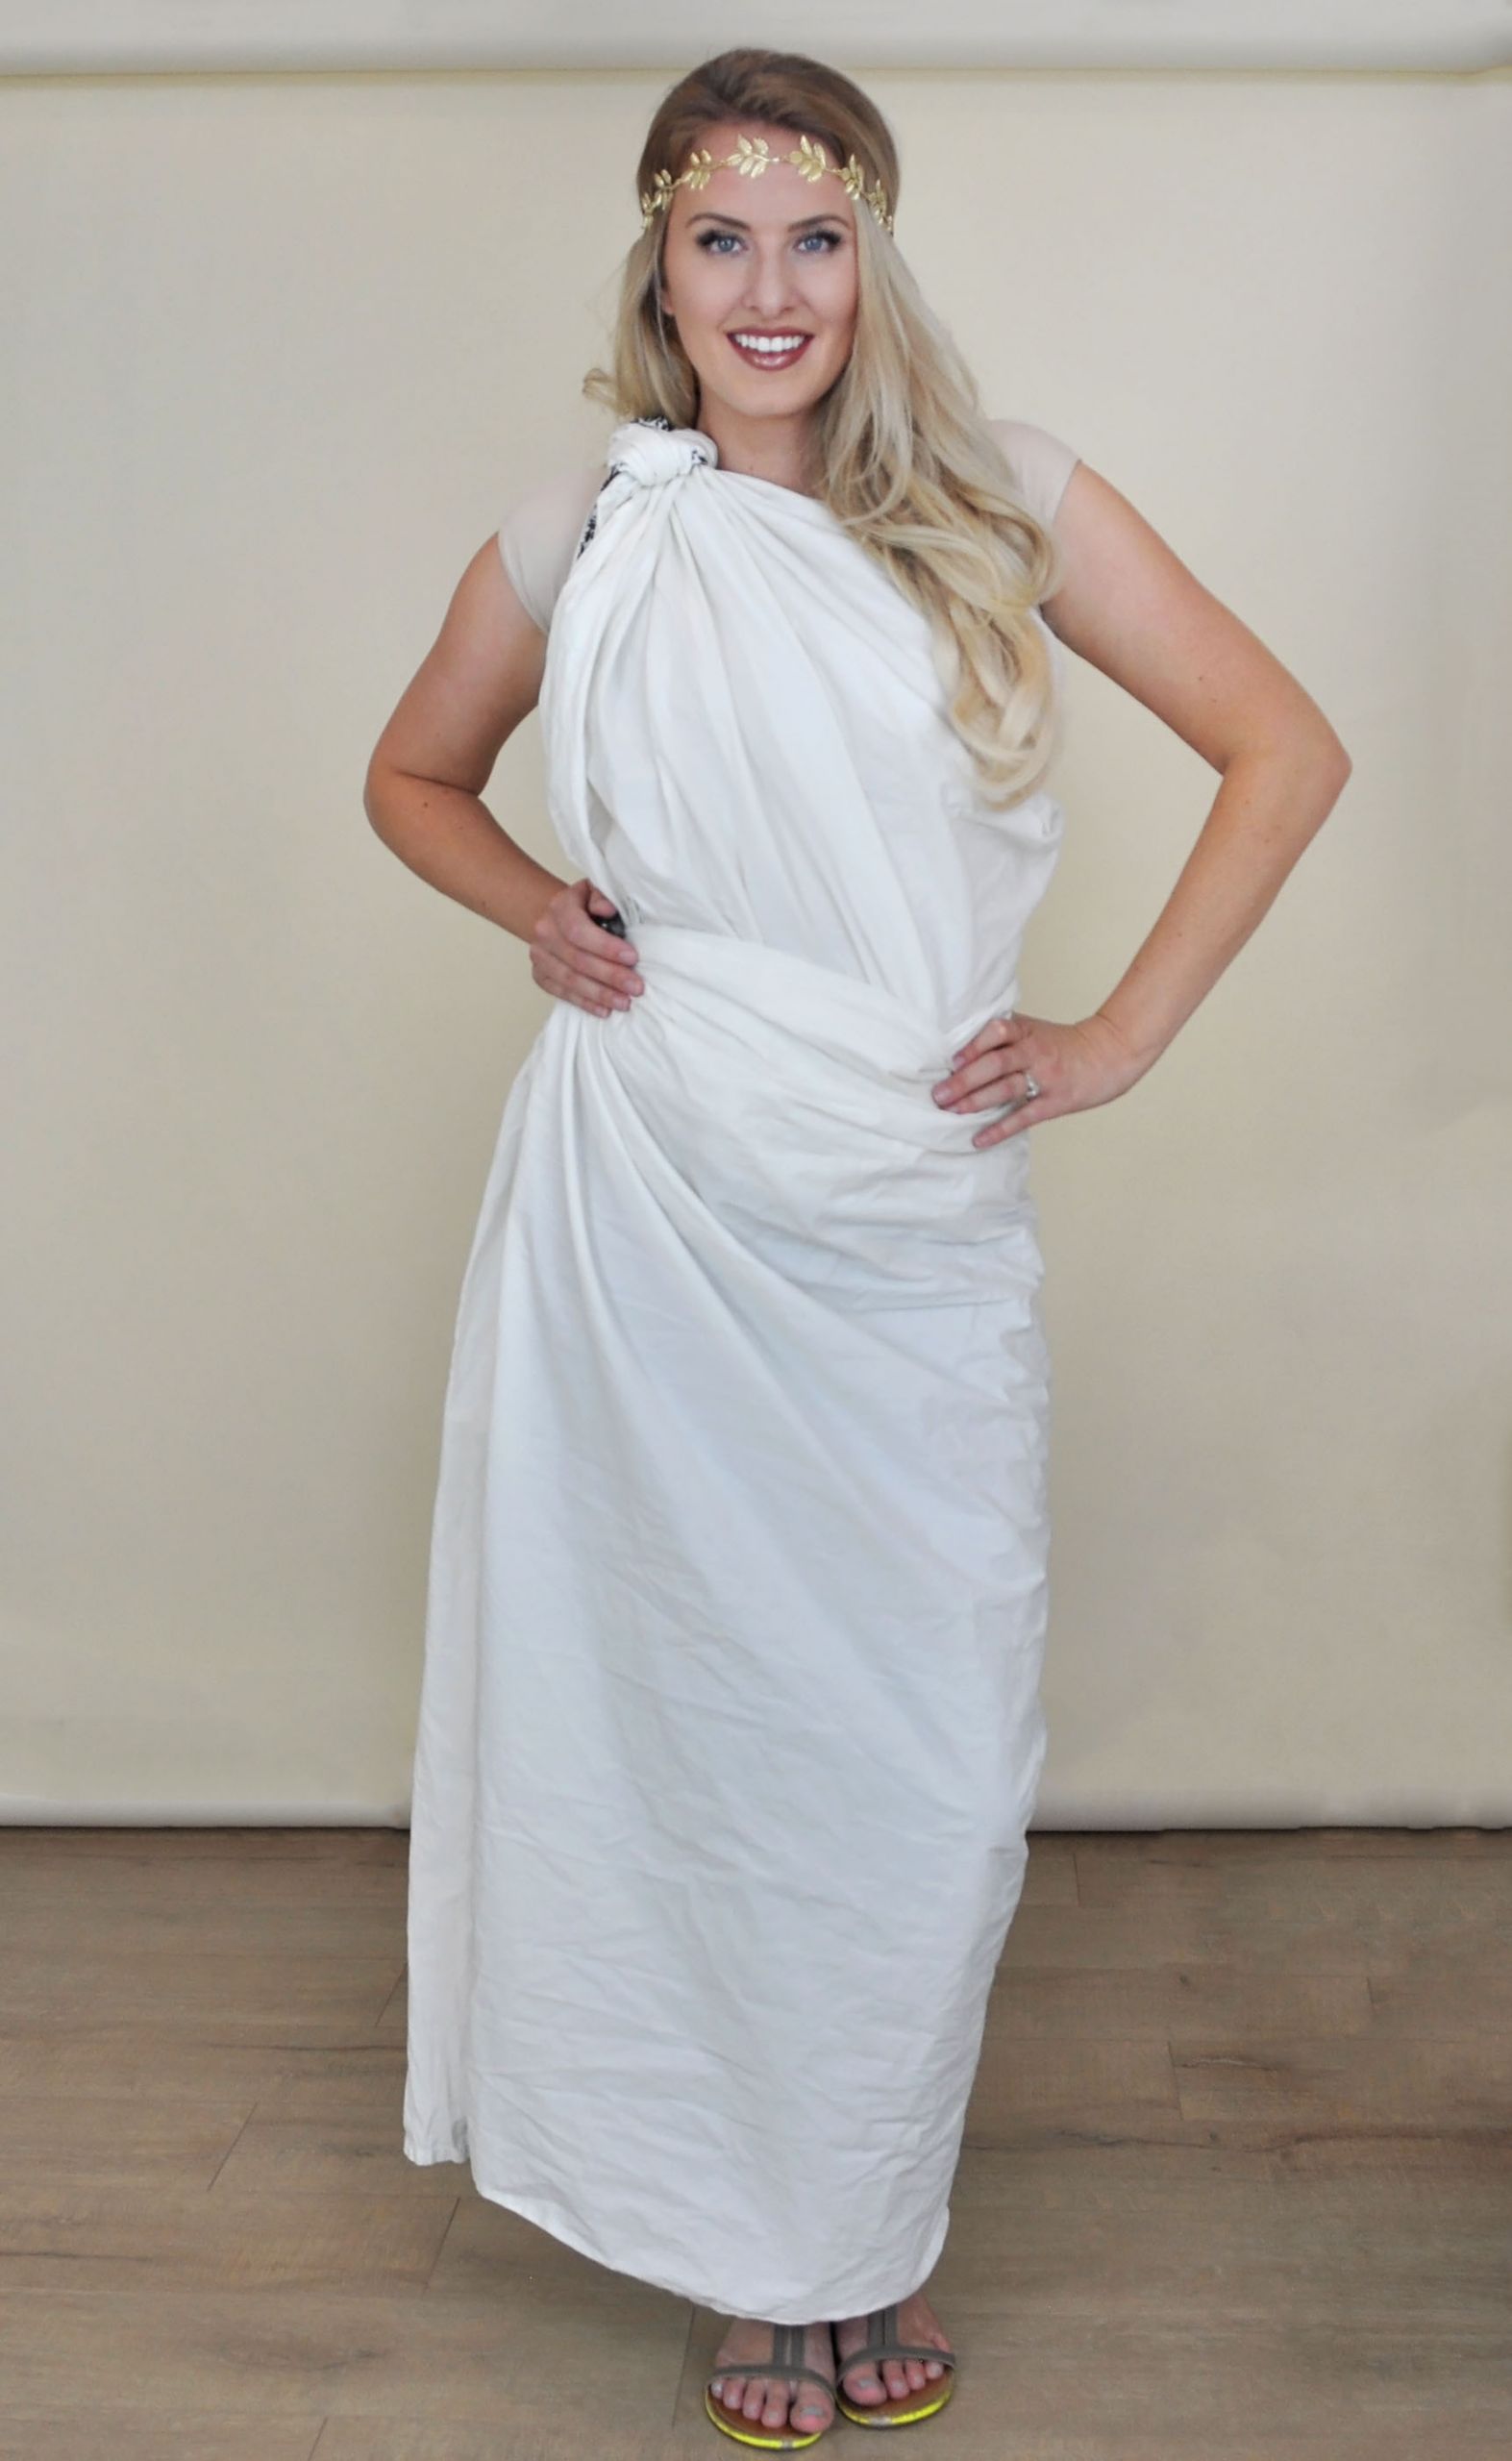 Best 35 Diy toga Costume - Home, Family, Style and Art Ideas